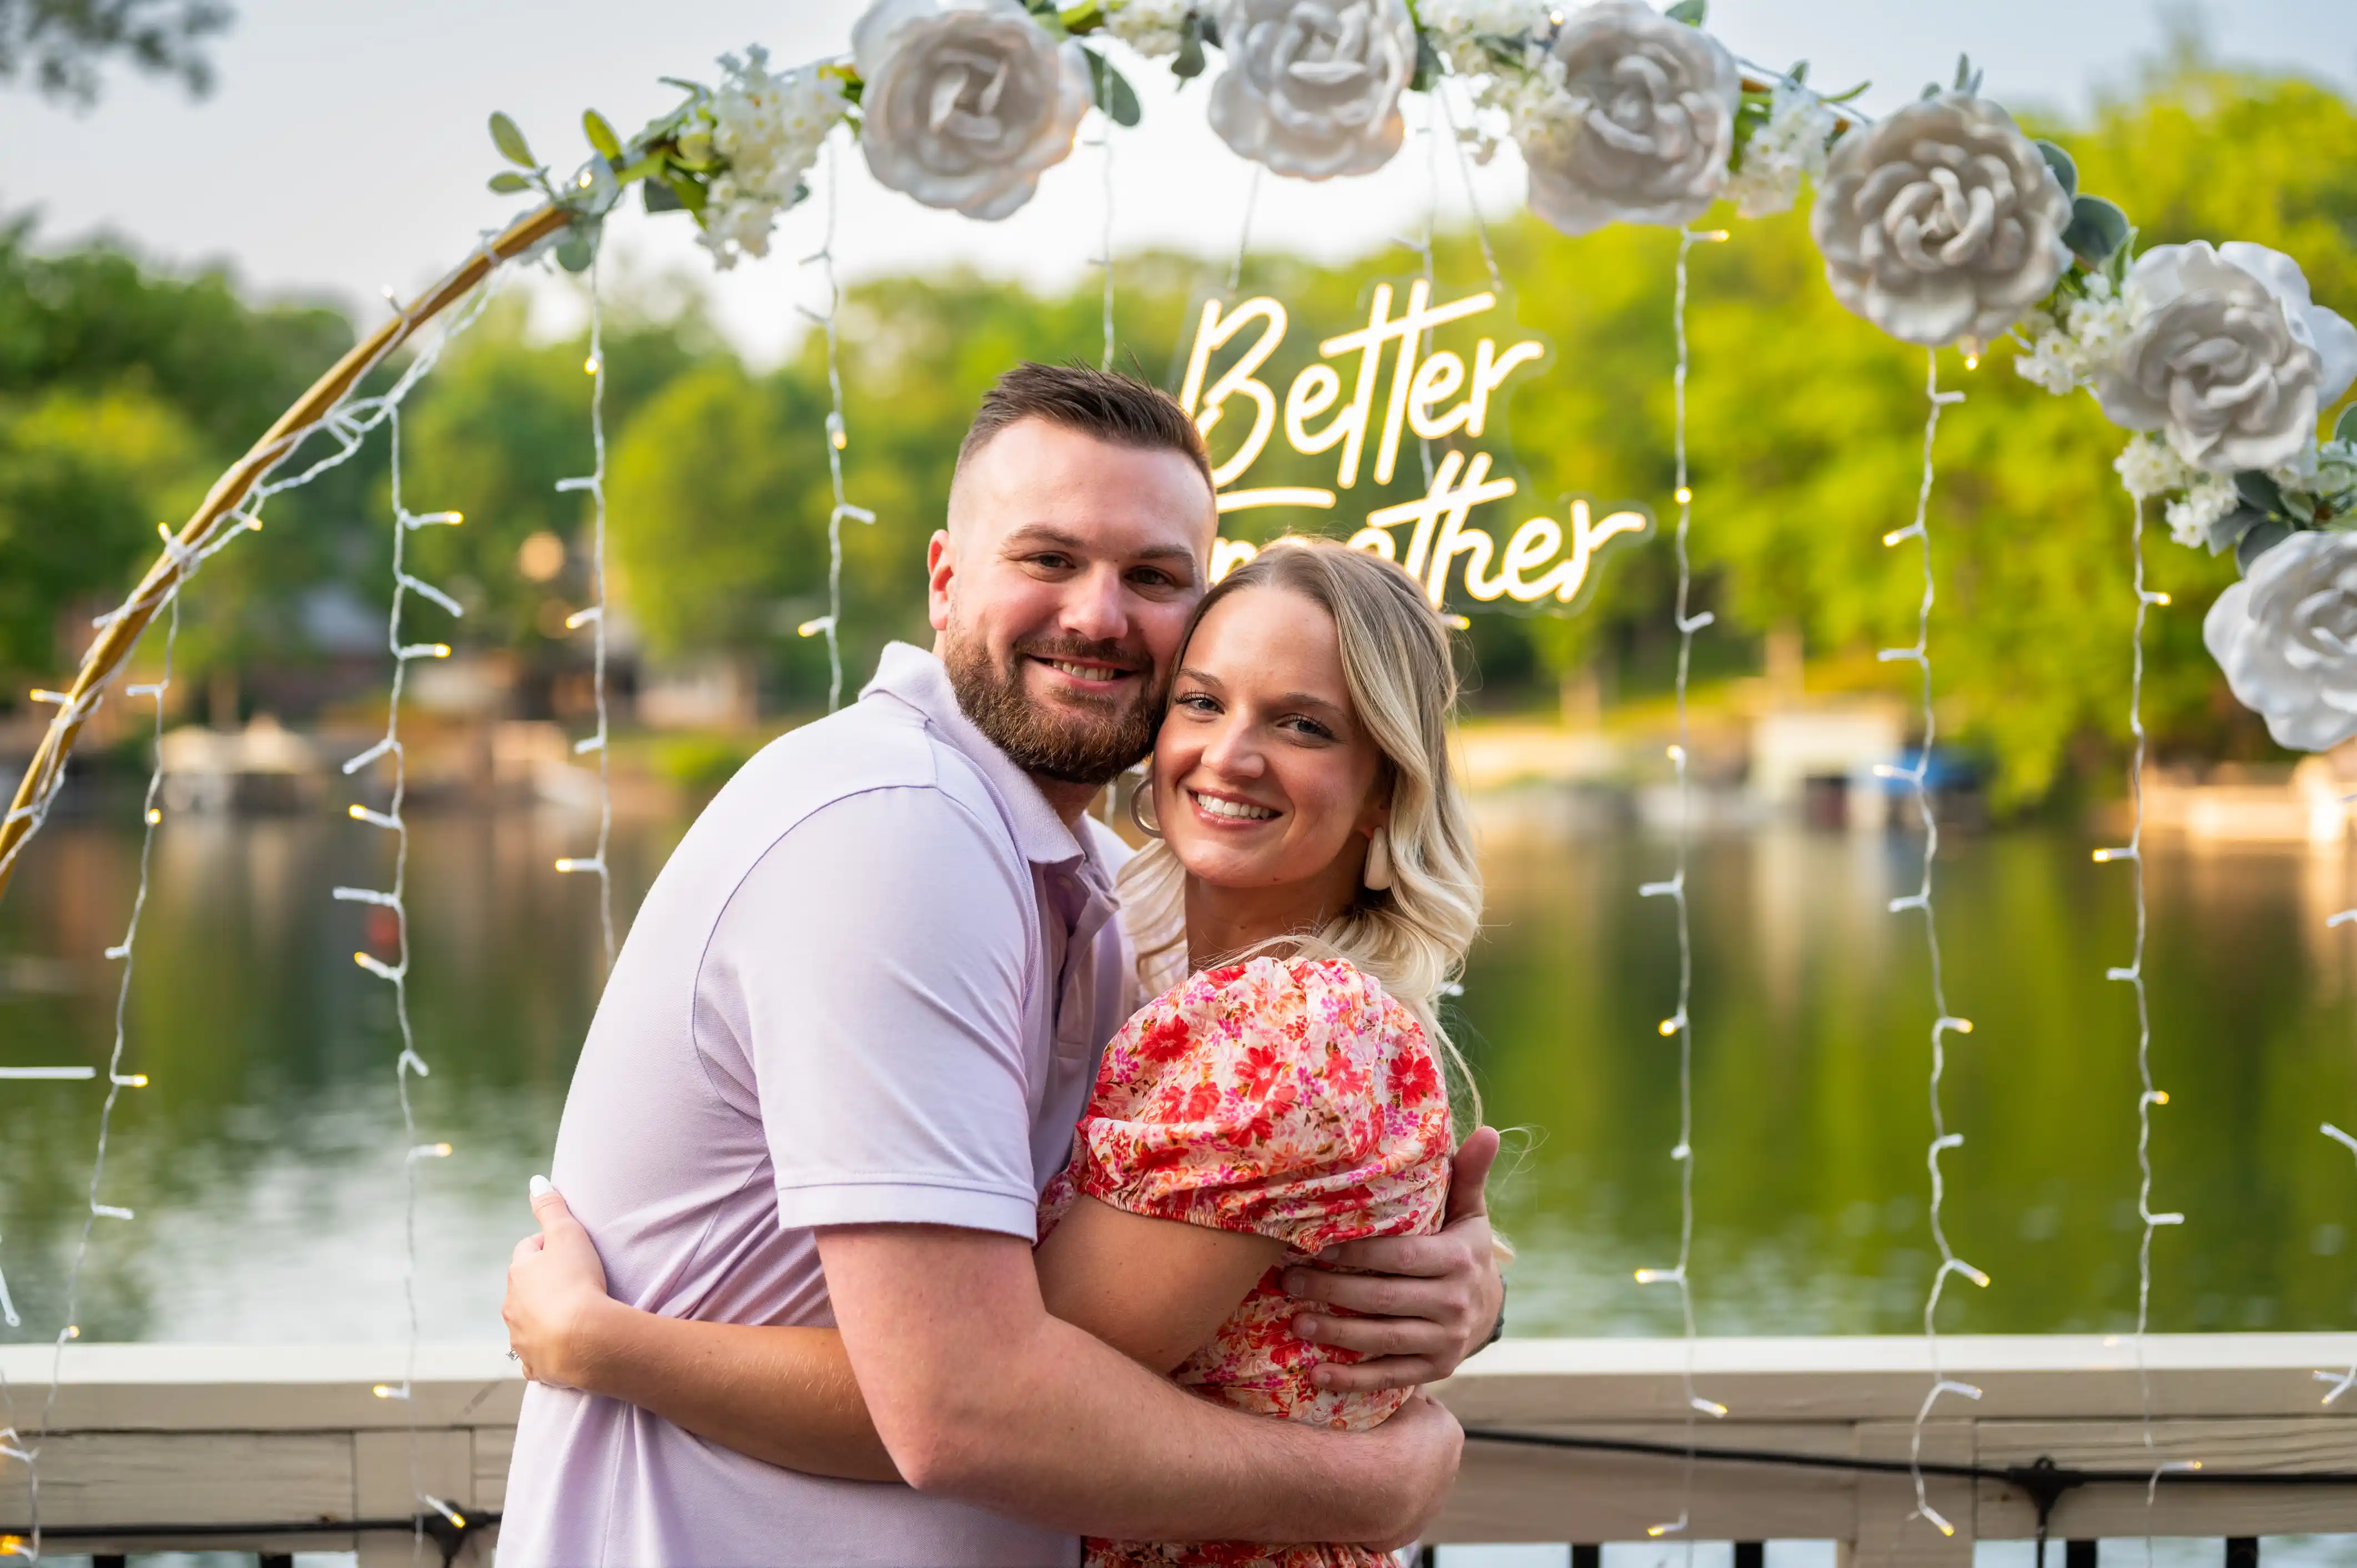 Couple embracing near a lake with the phrase "Better Together" displayed above them in decorative writing, surrounded by a floral design.